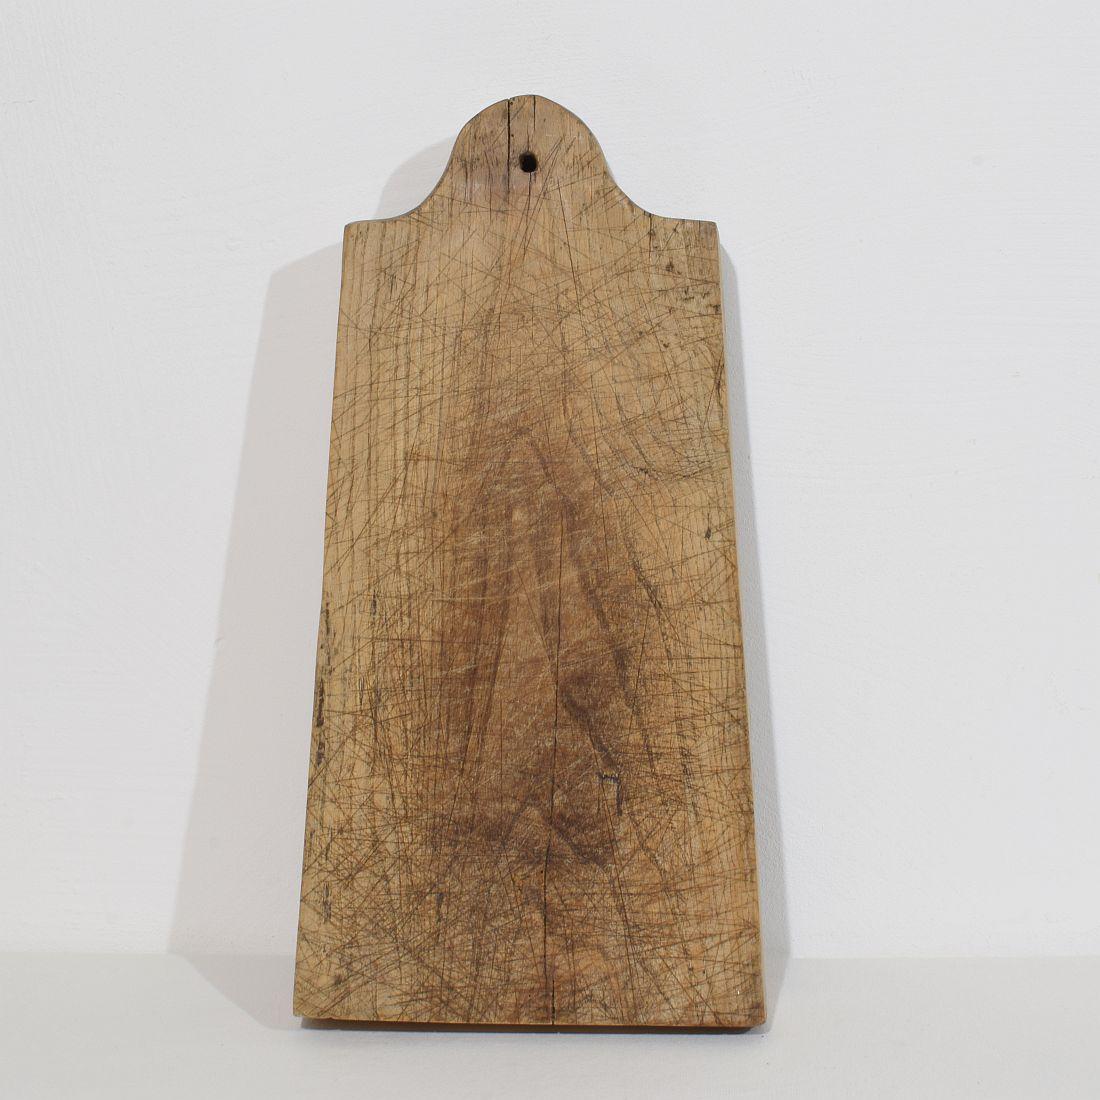 French Provincial French 19th Century, Thick Wooden Chopping or Cutting Board For Sale